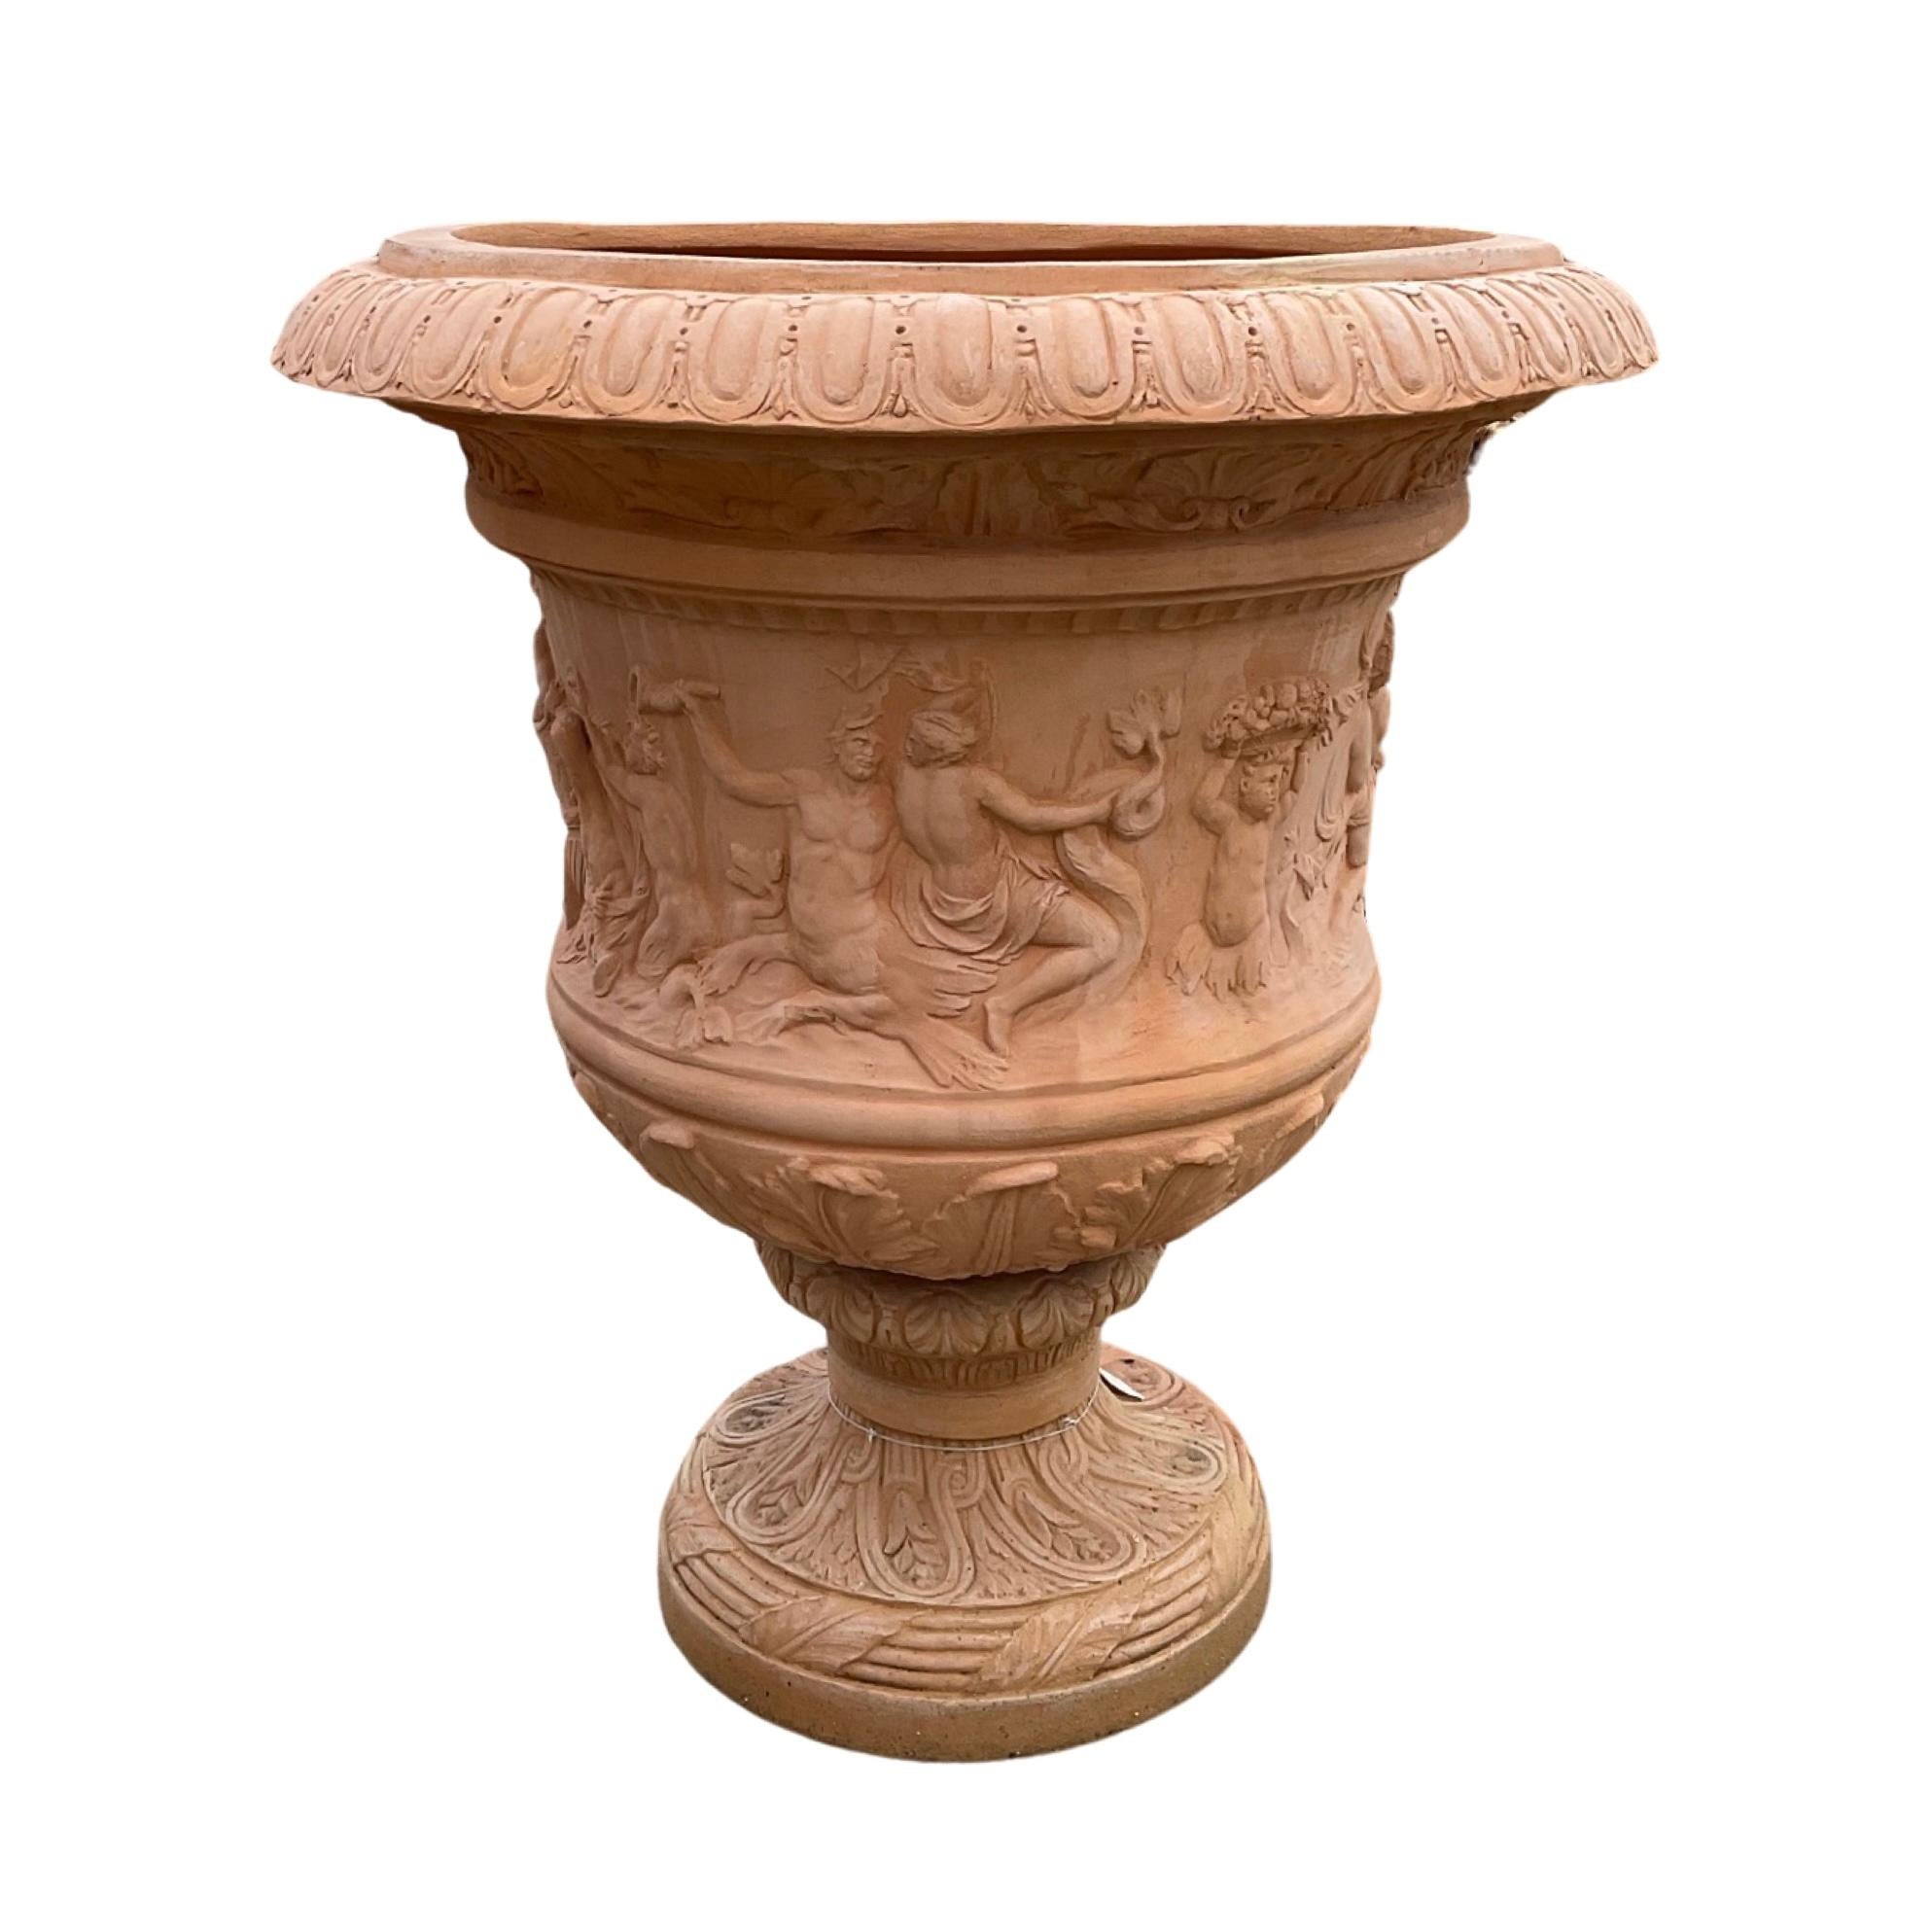 Expertly crafted in Italy, this midcentury terracotta planter boasts intricate Greek carvings of Gods. Its large size is perfect for showcasing beautiful plants and adding a touch of ancient elegance to any space. Elevate your gardening game with